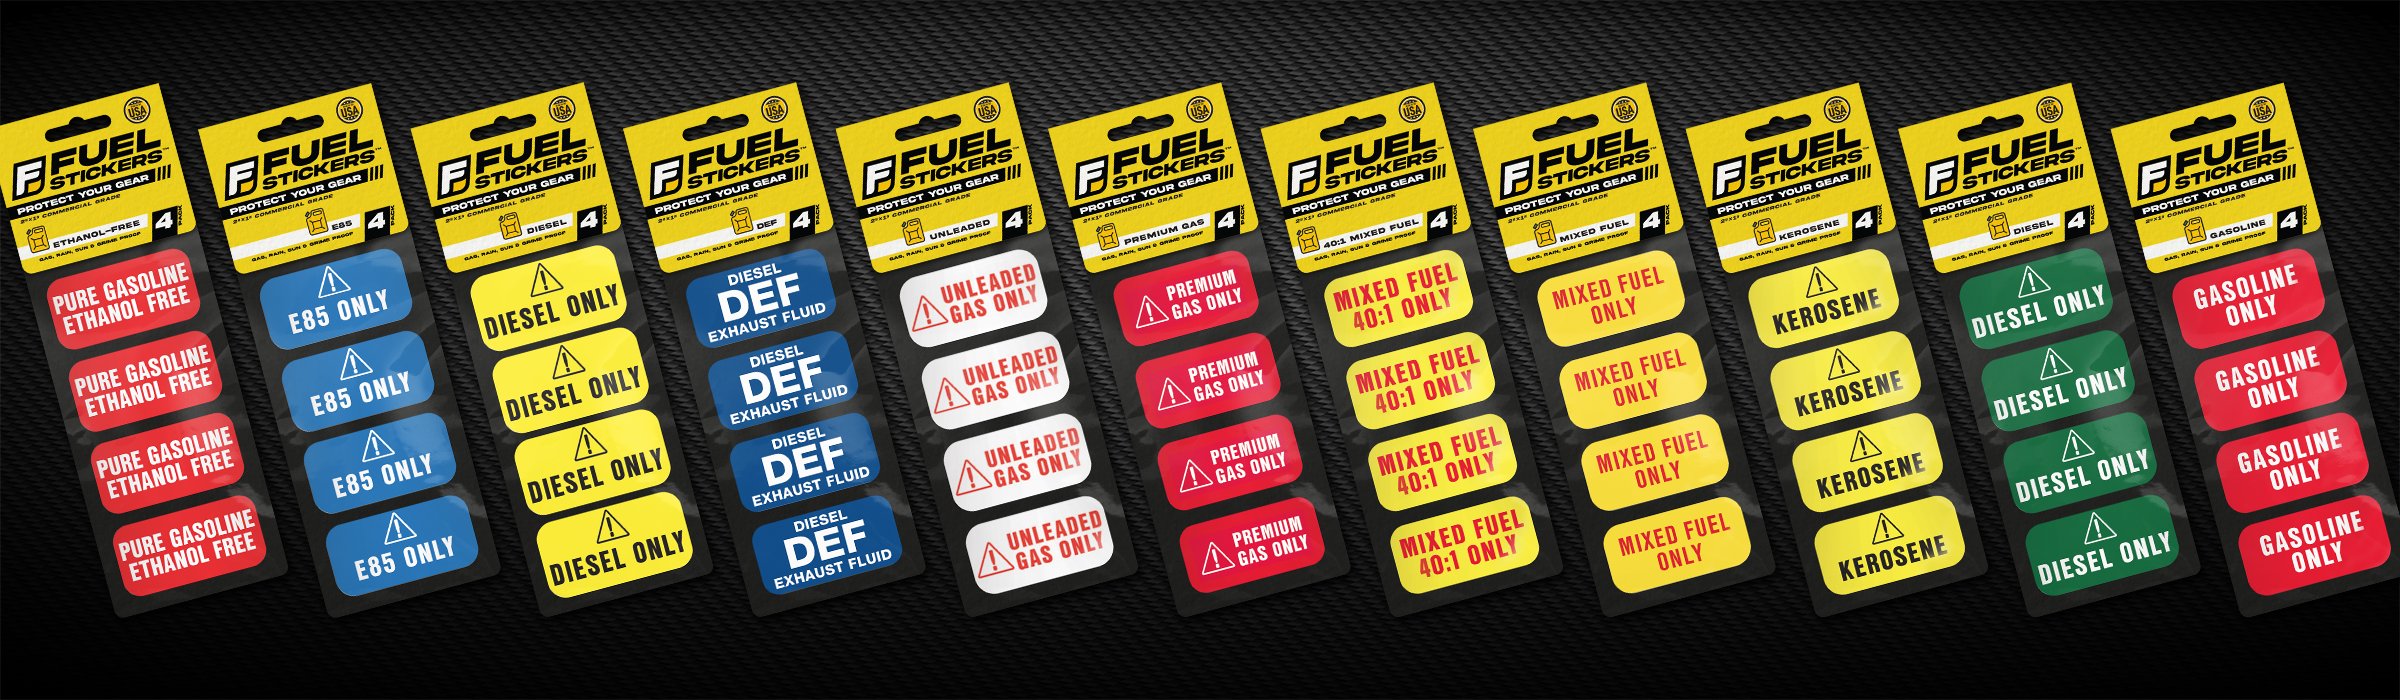 Fuel Stickers - Heavy-Duty Gas Can Labels and Outdoor Power